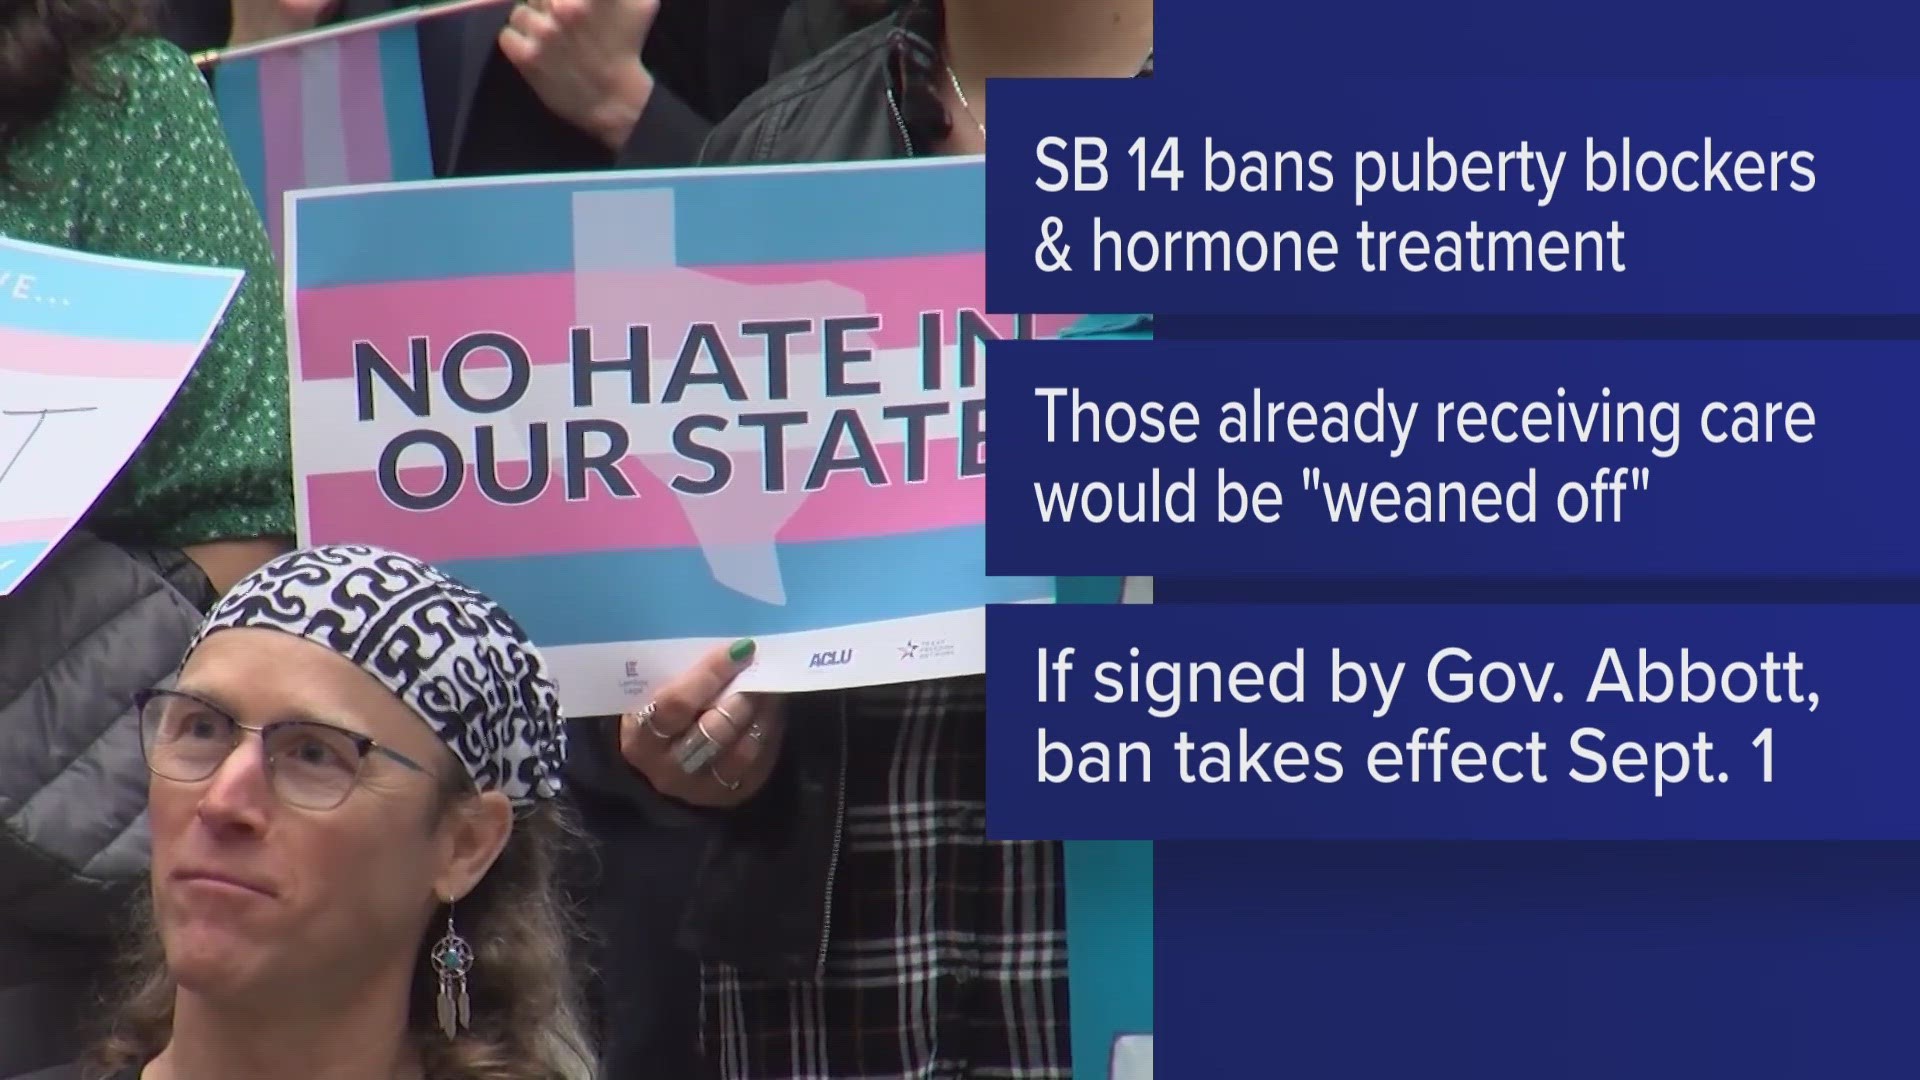 If Senate Bill 14 becomes law, the ban would take effect on Sept. 1.